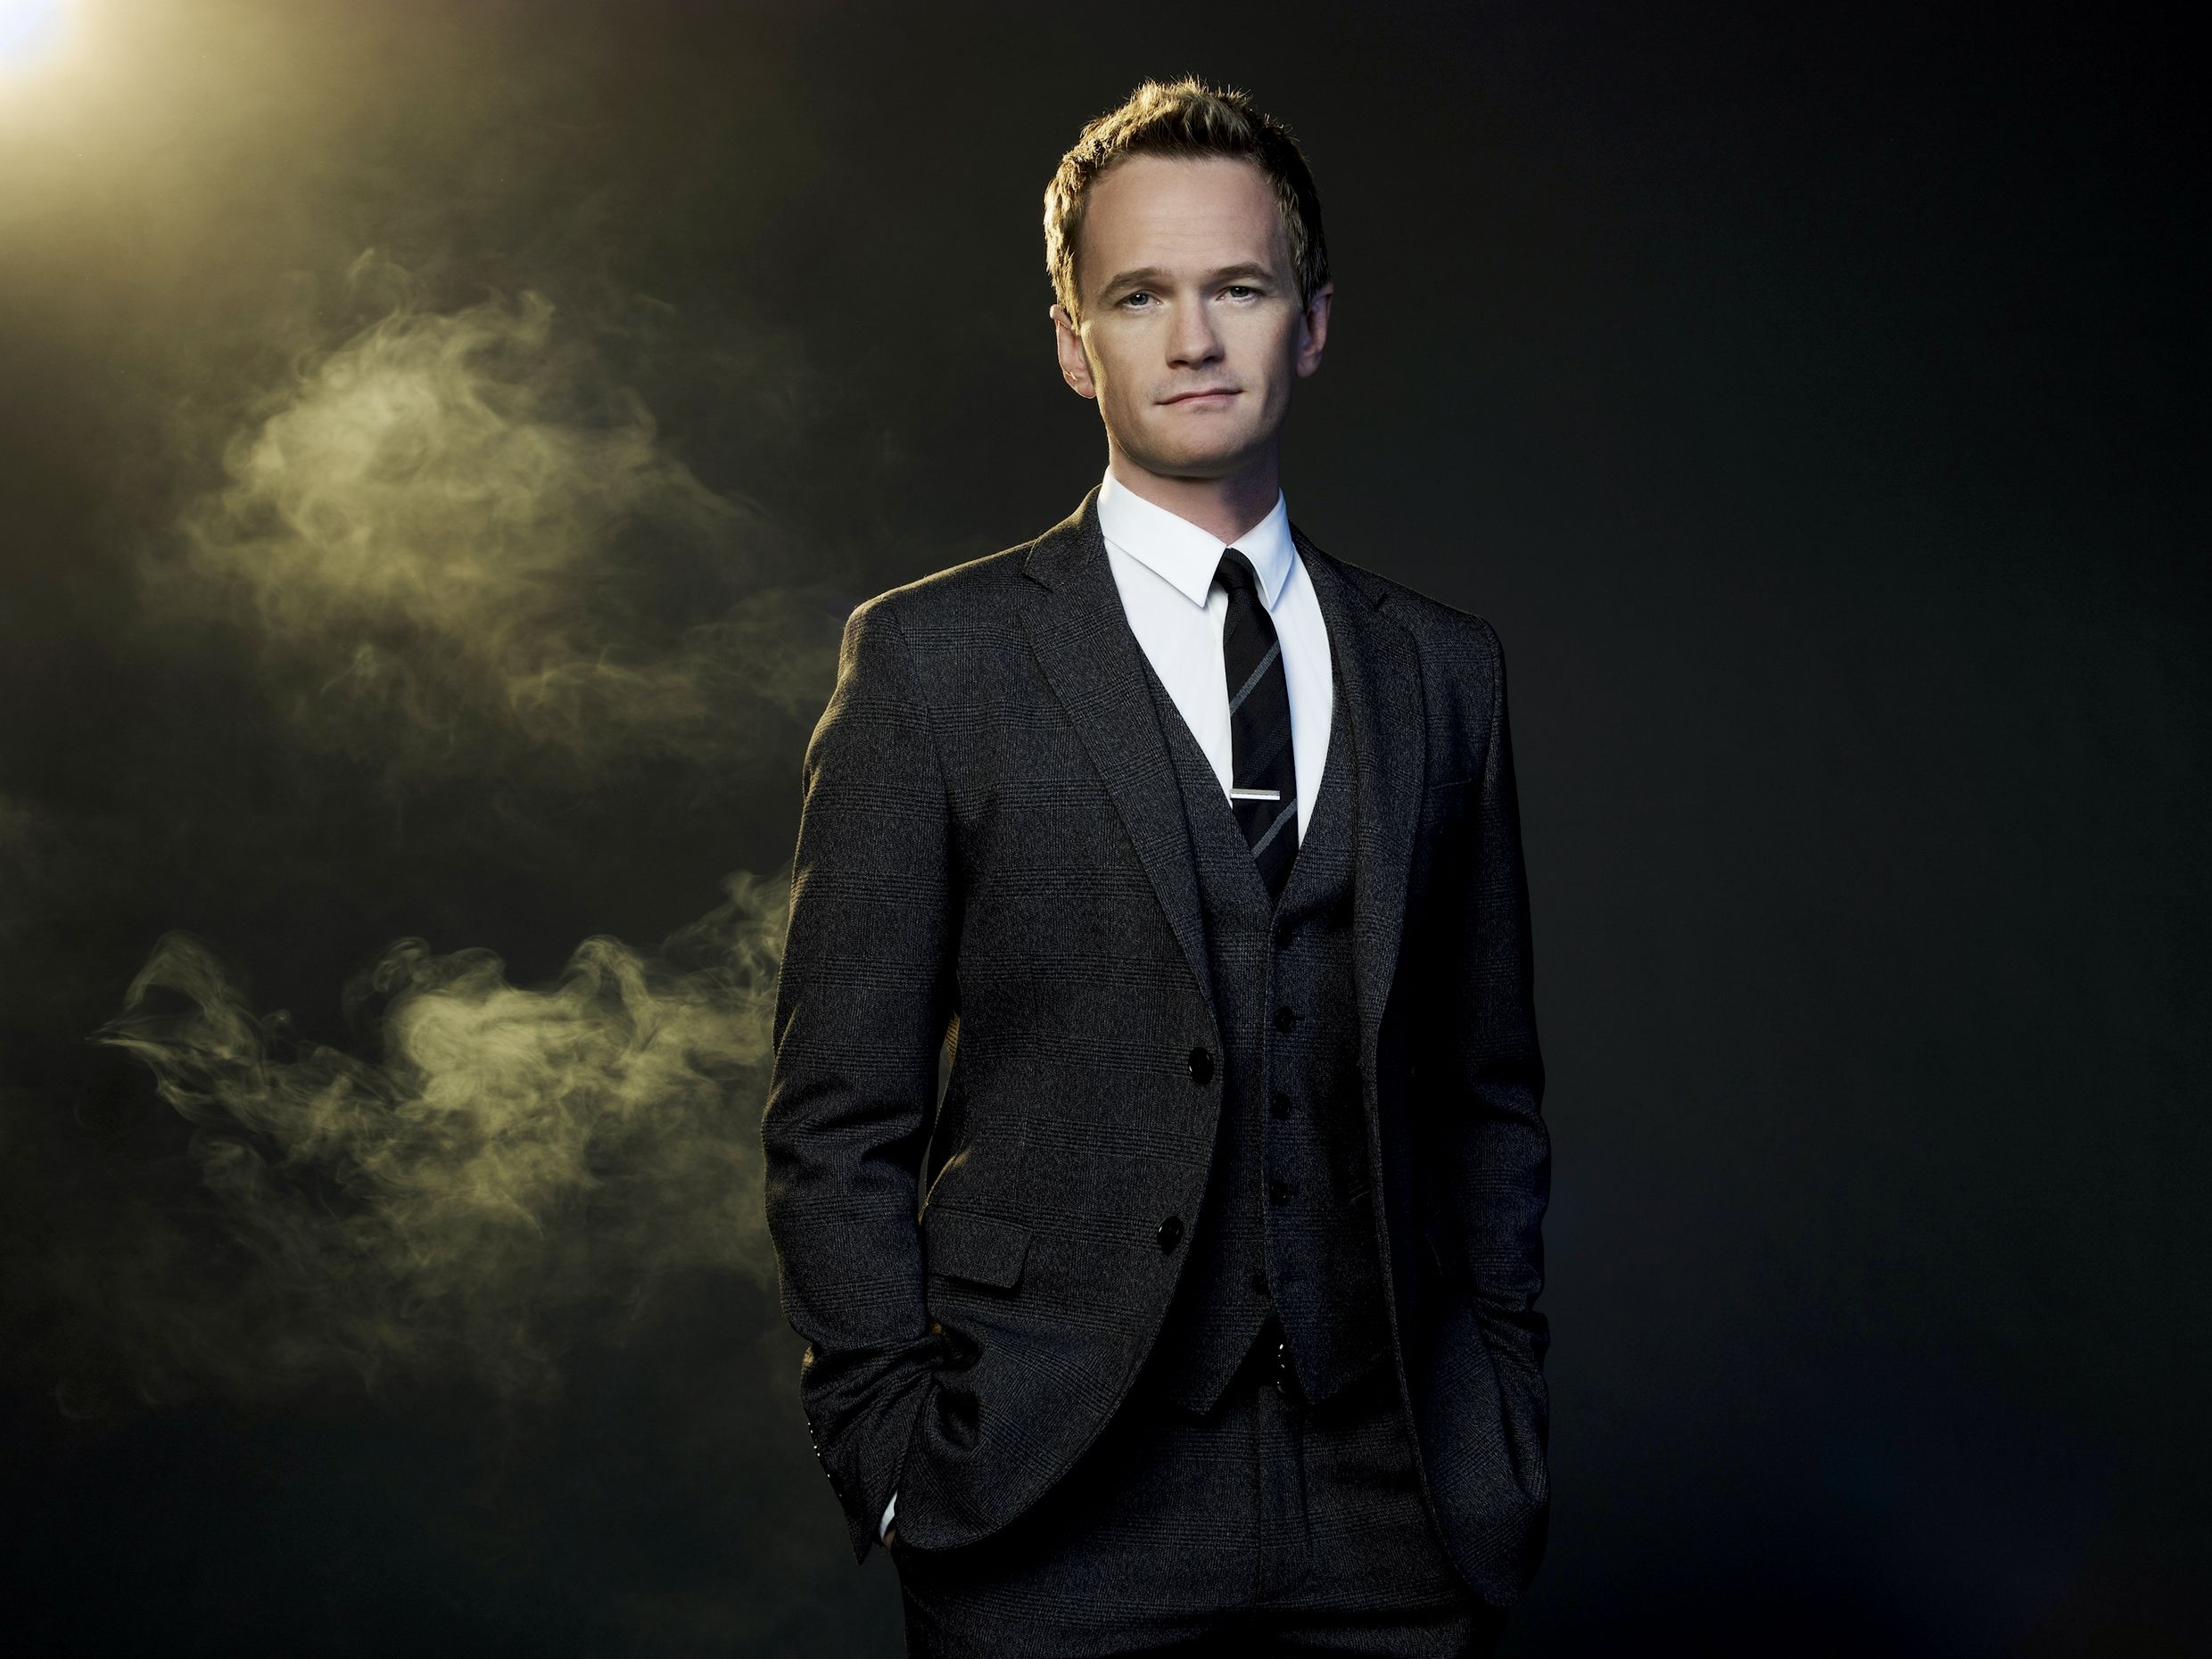 Barney Stinson Wallpapers - Top Free Barney Stinson Backgrounds 2480x1860